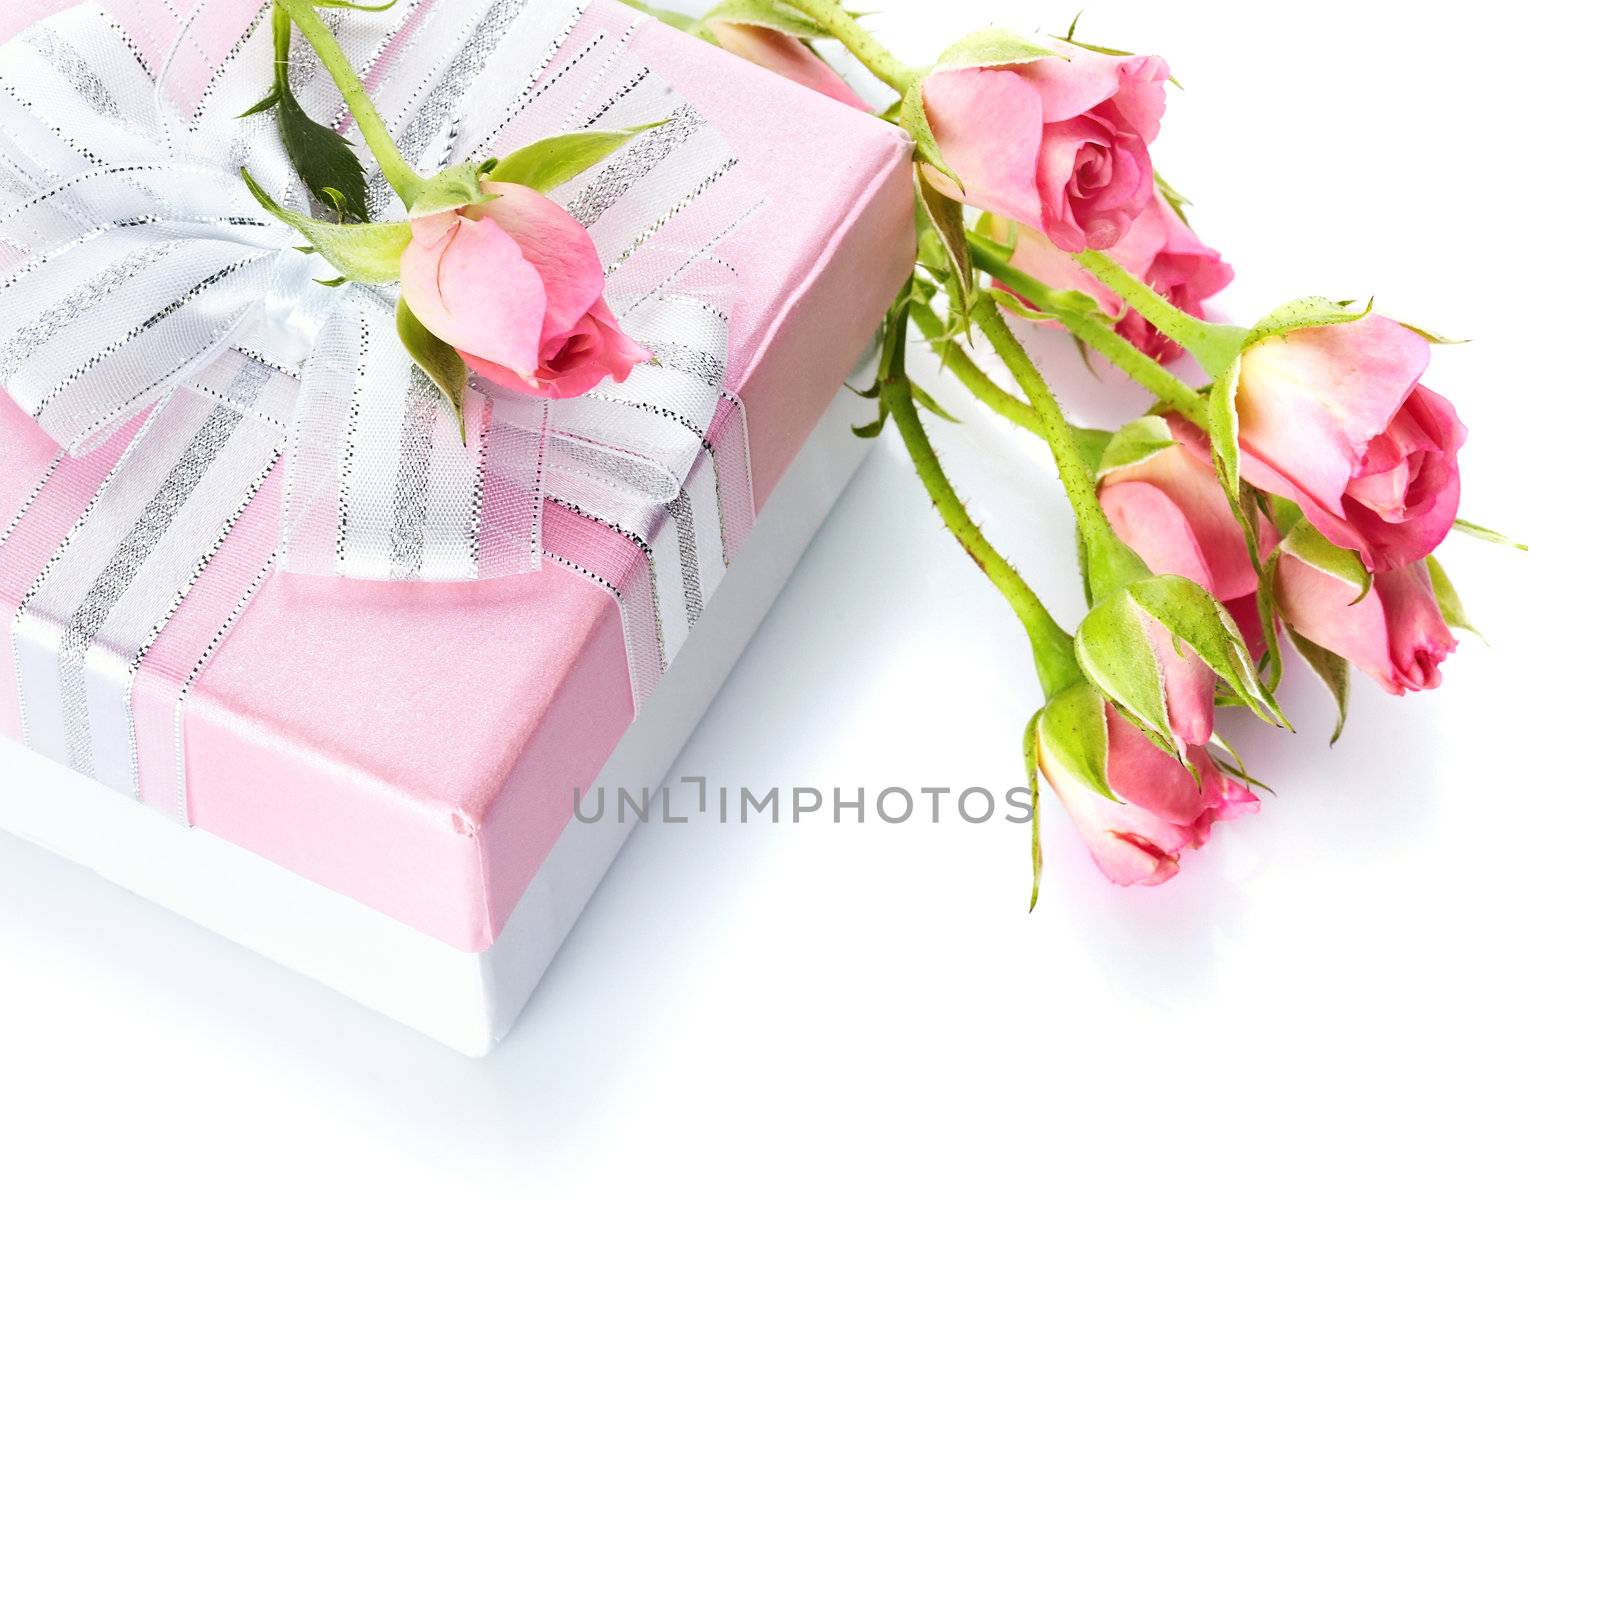 Gift box and roses. Festive surprise. Box with a bow. Elegant gift.